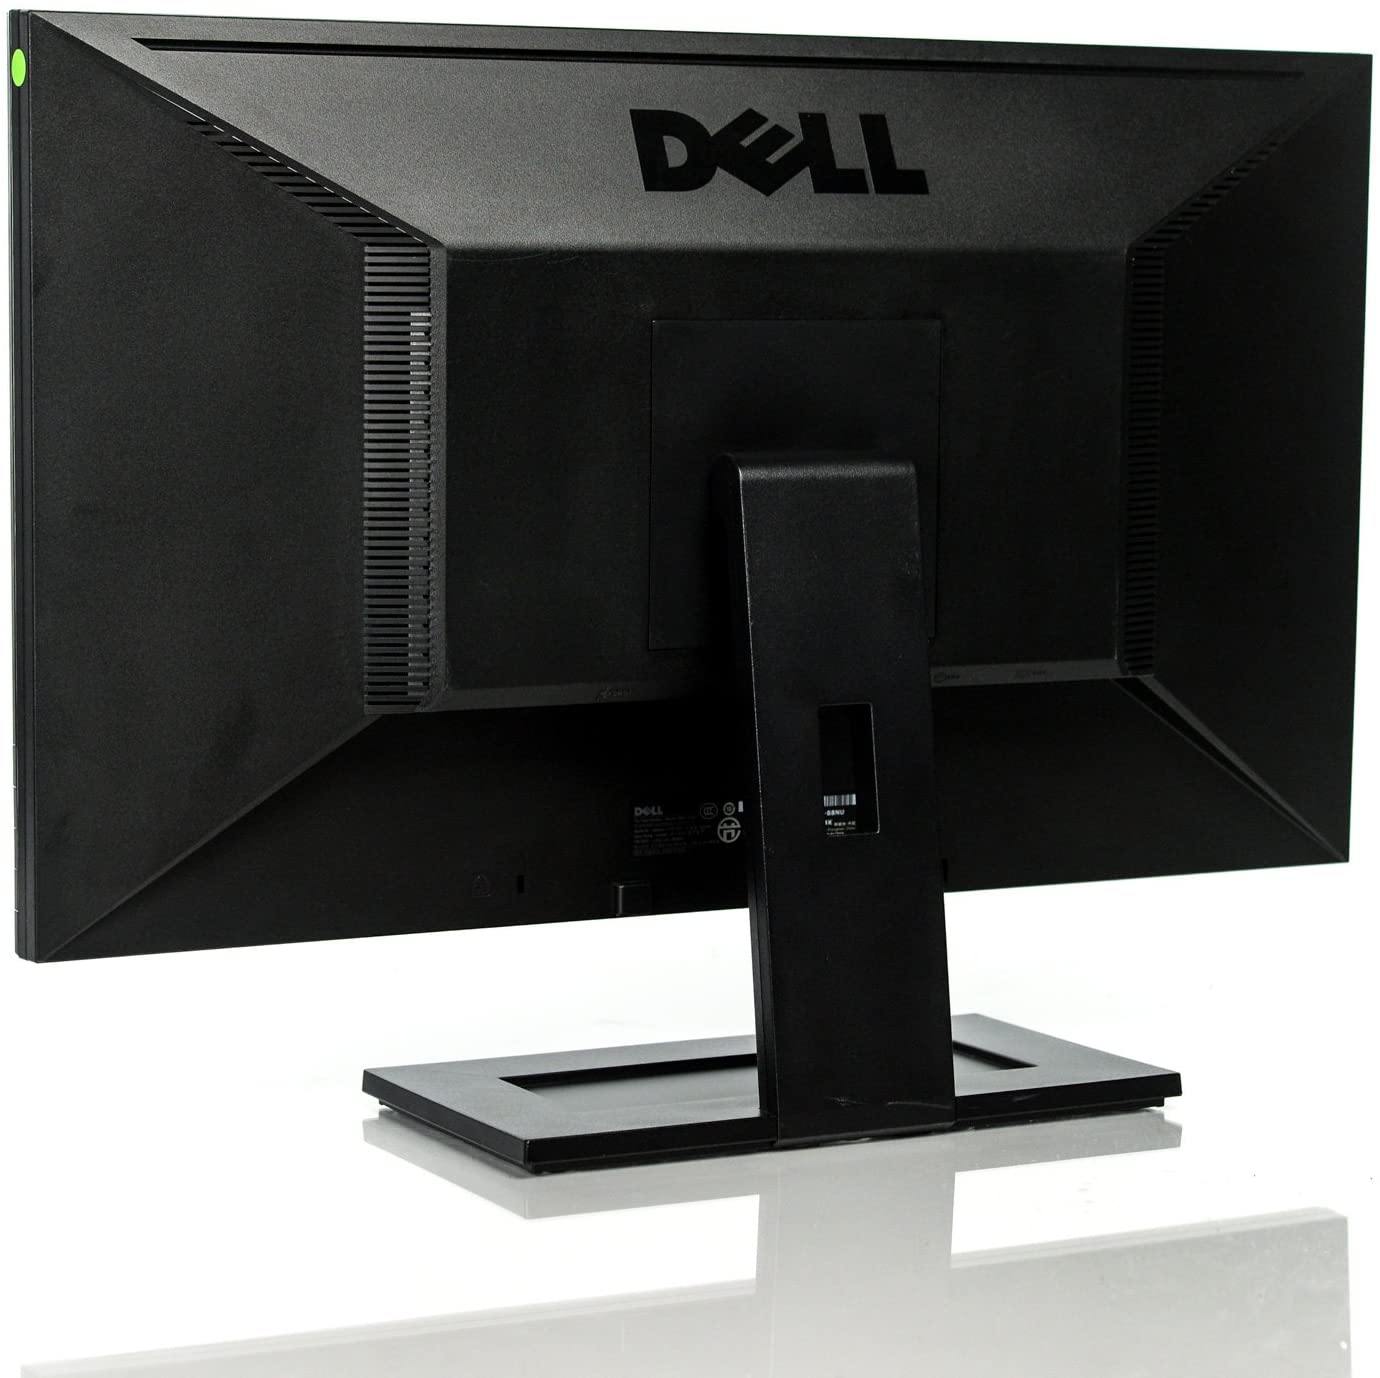 DELL G2410 24-Inch Screen LED-Lit Monitor, Black Refurbished - Atlas Computers & Electronics 